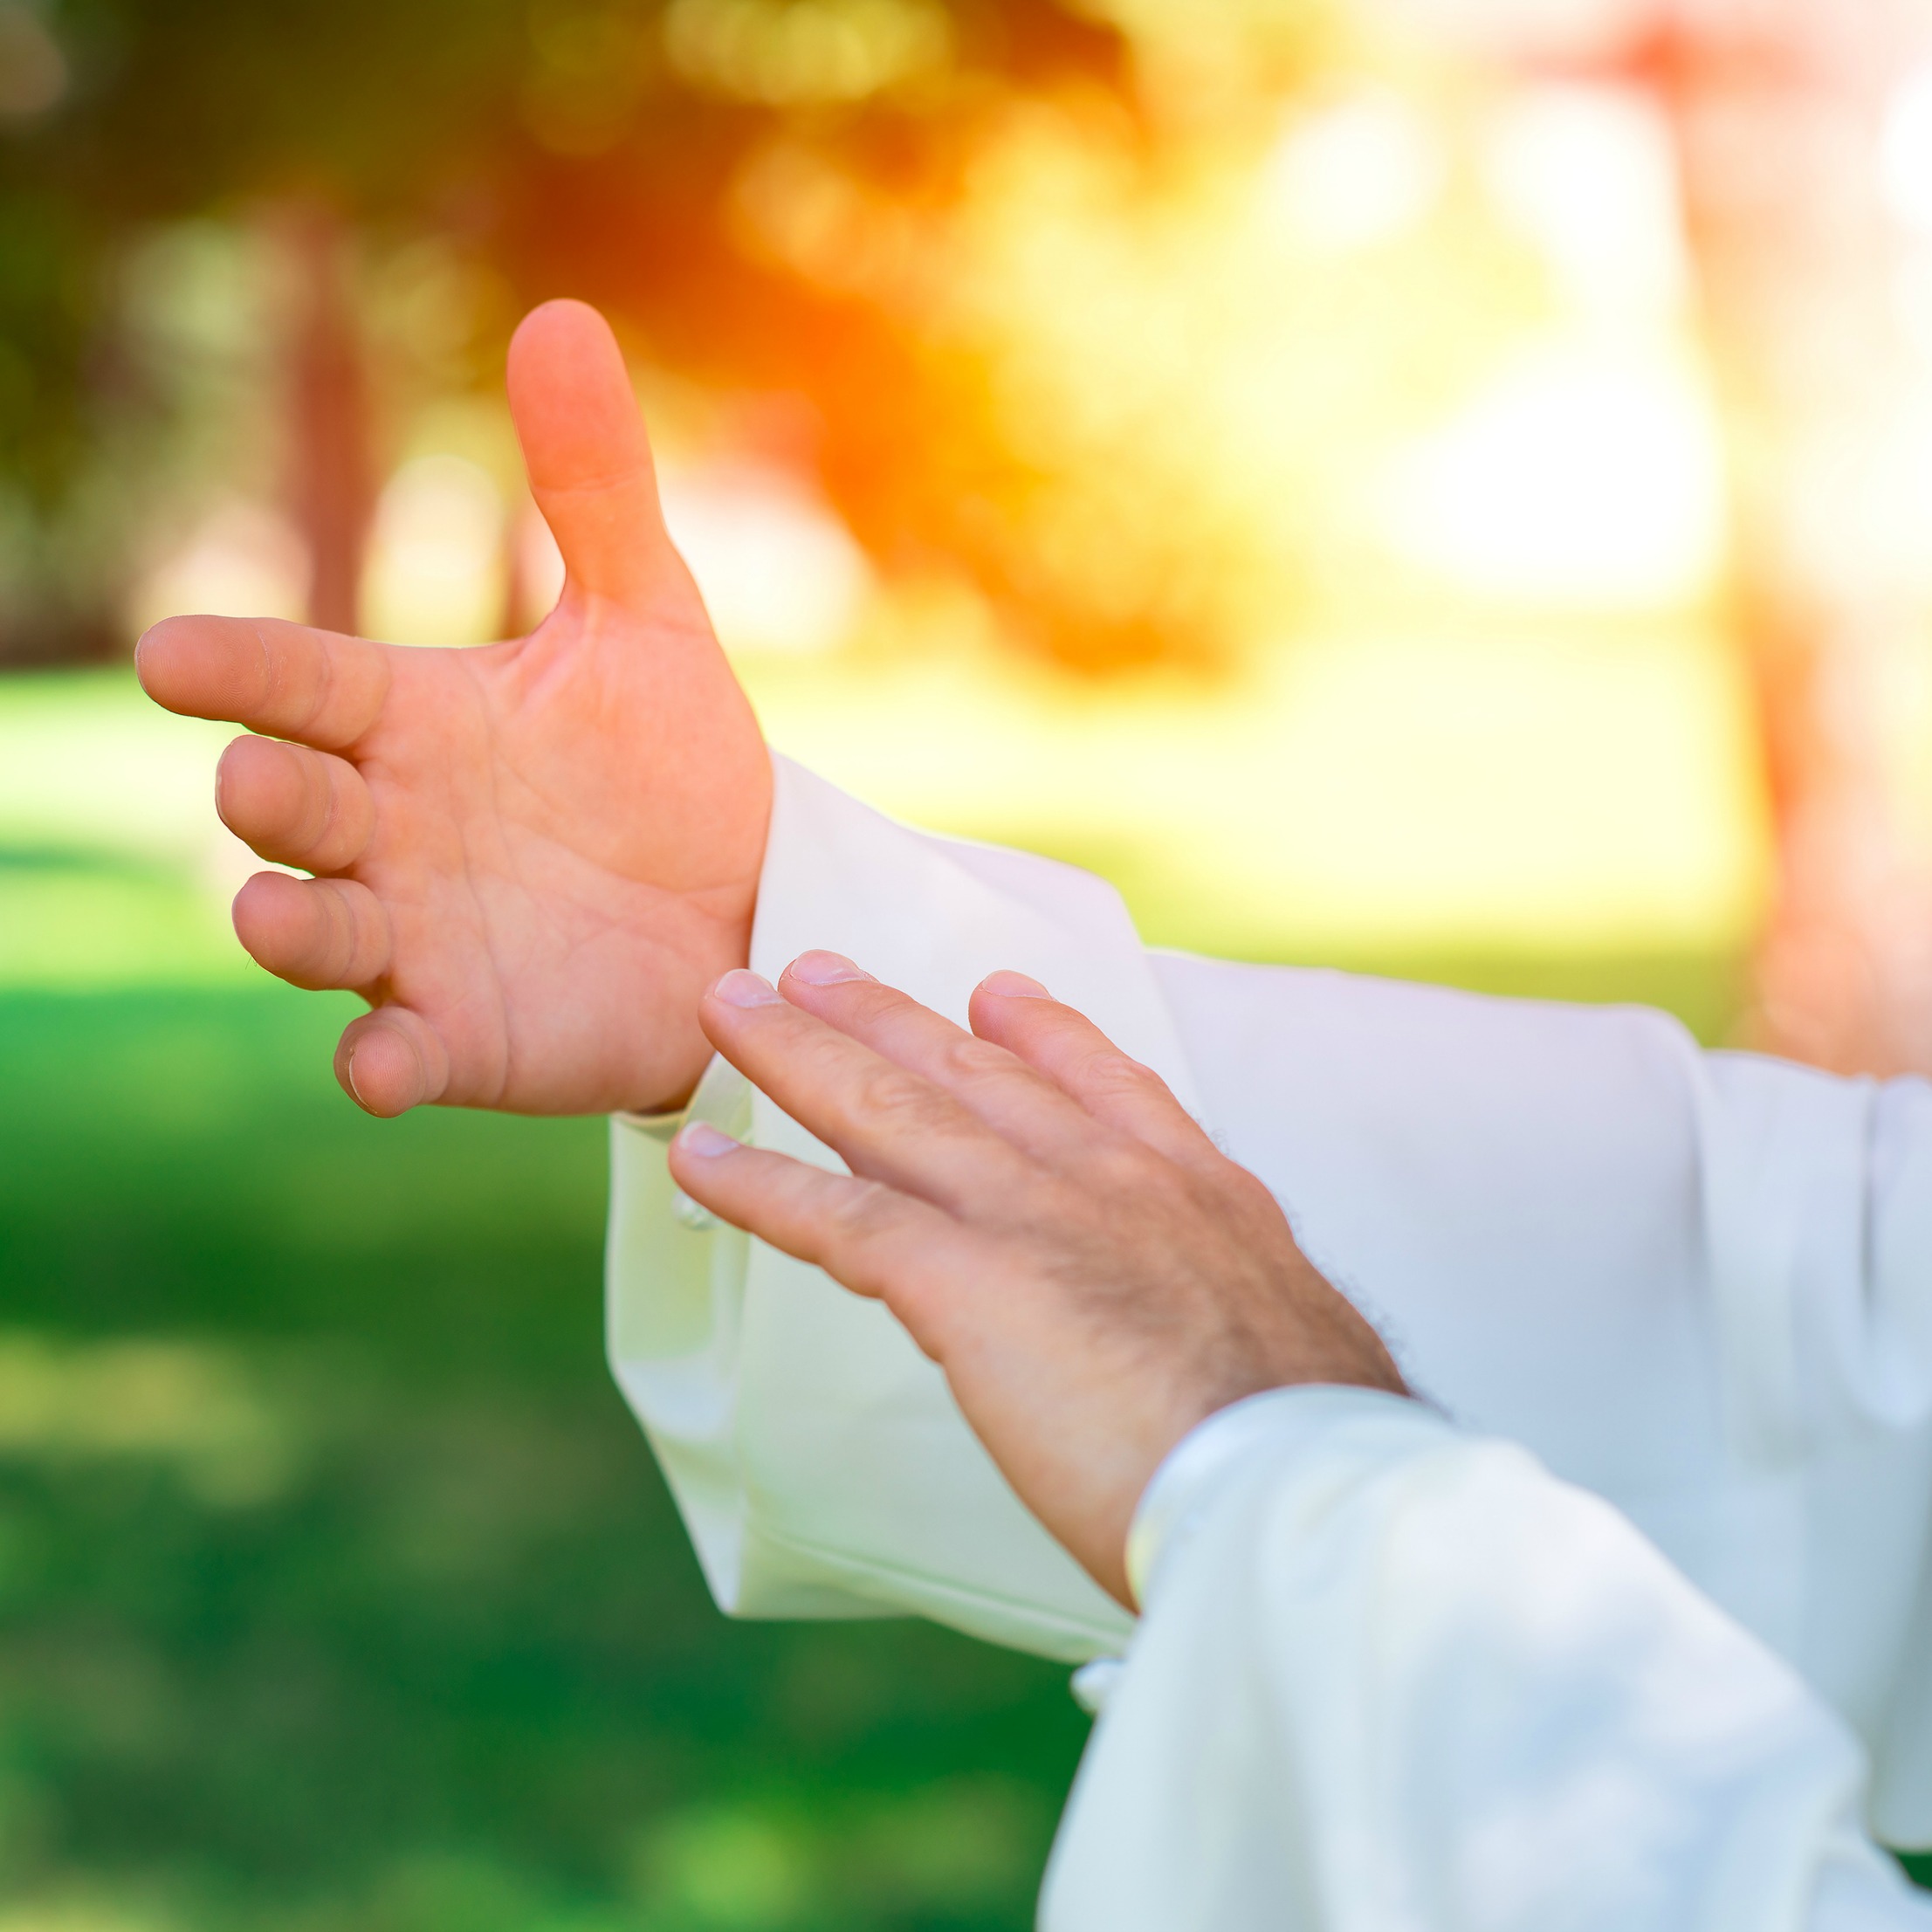 Tai Chi is Beneficial for Fall Prevention